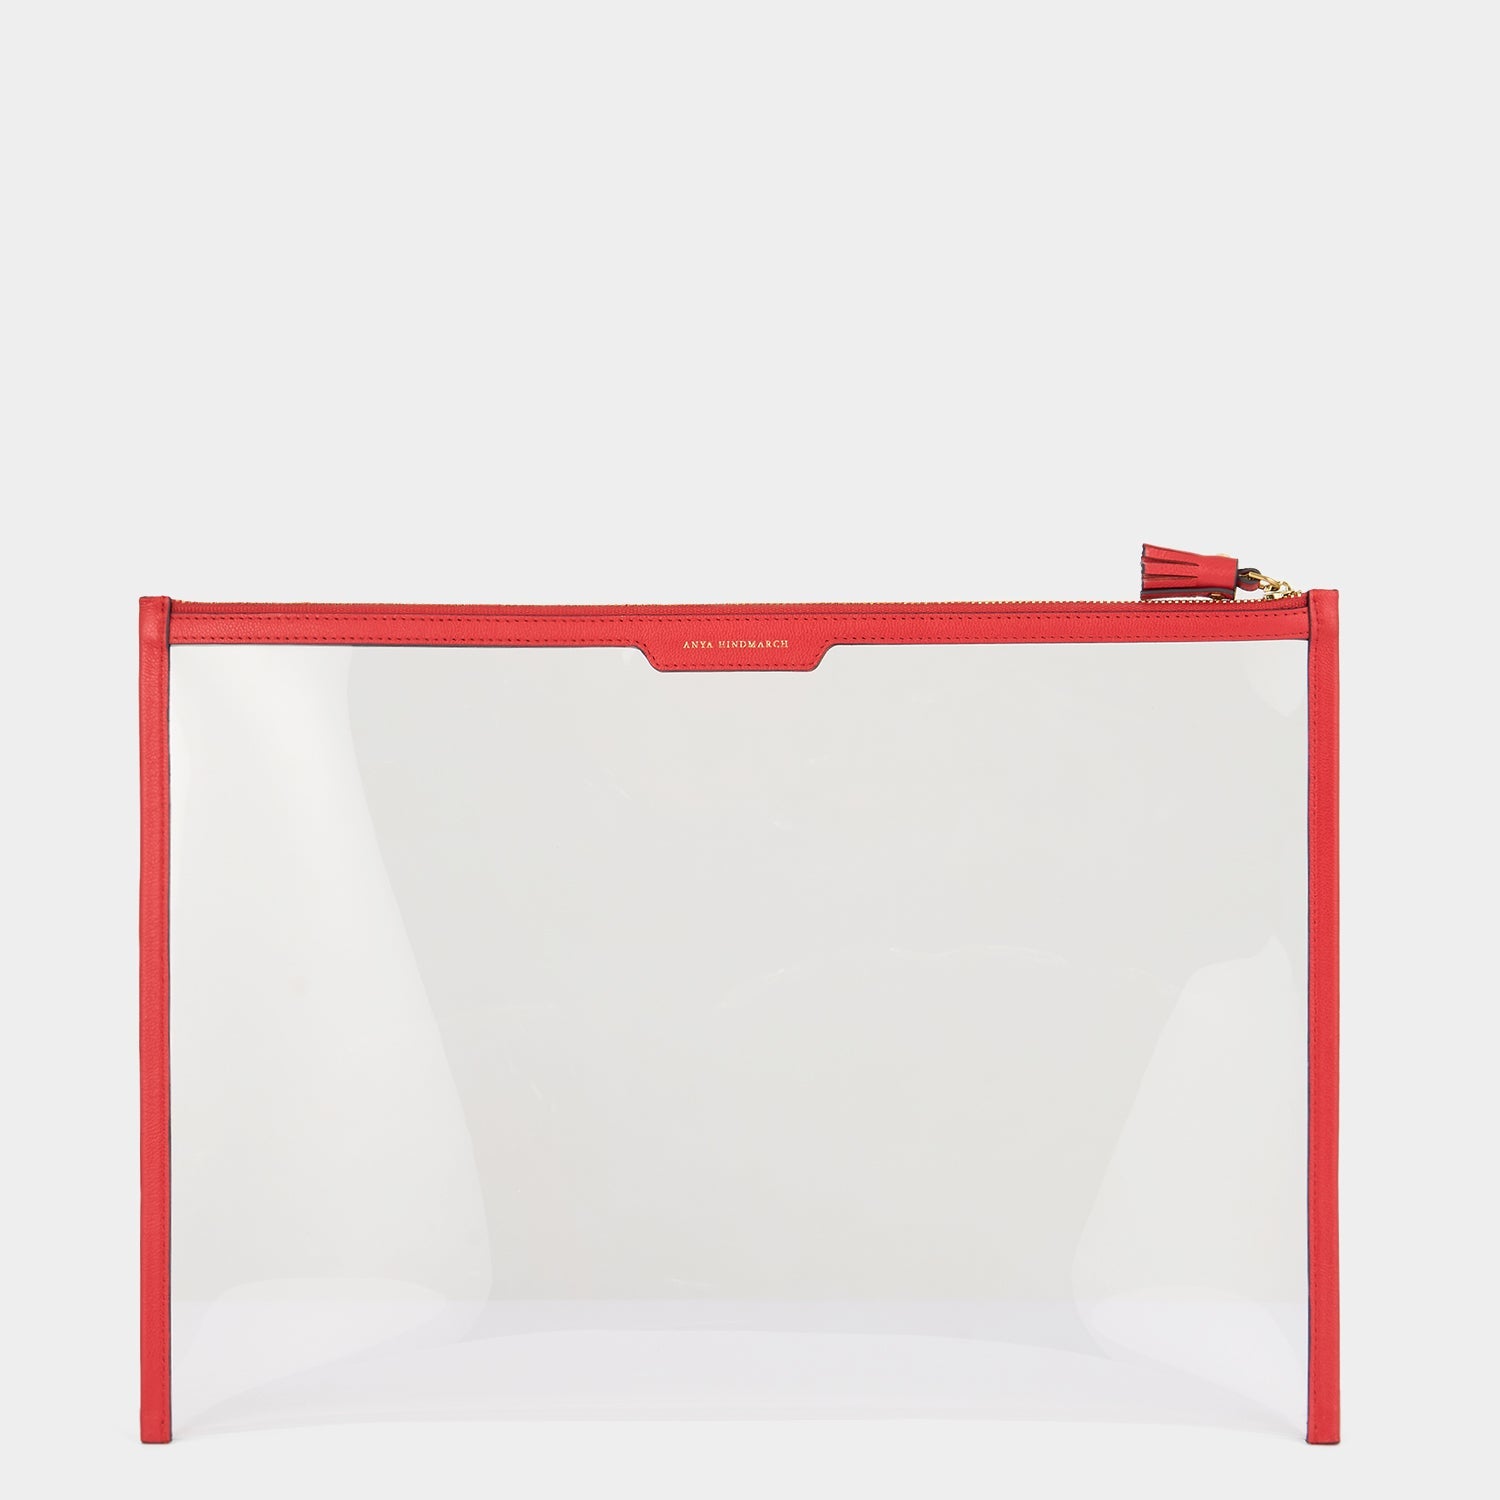 Papers Zip Sleeve -

                  
                    Capra Leather in Salmon/Clear -
                  

                  Anya Hindmarch EU
